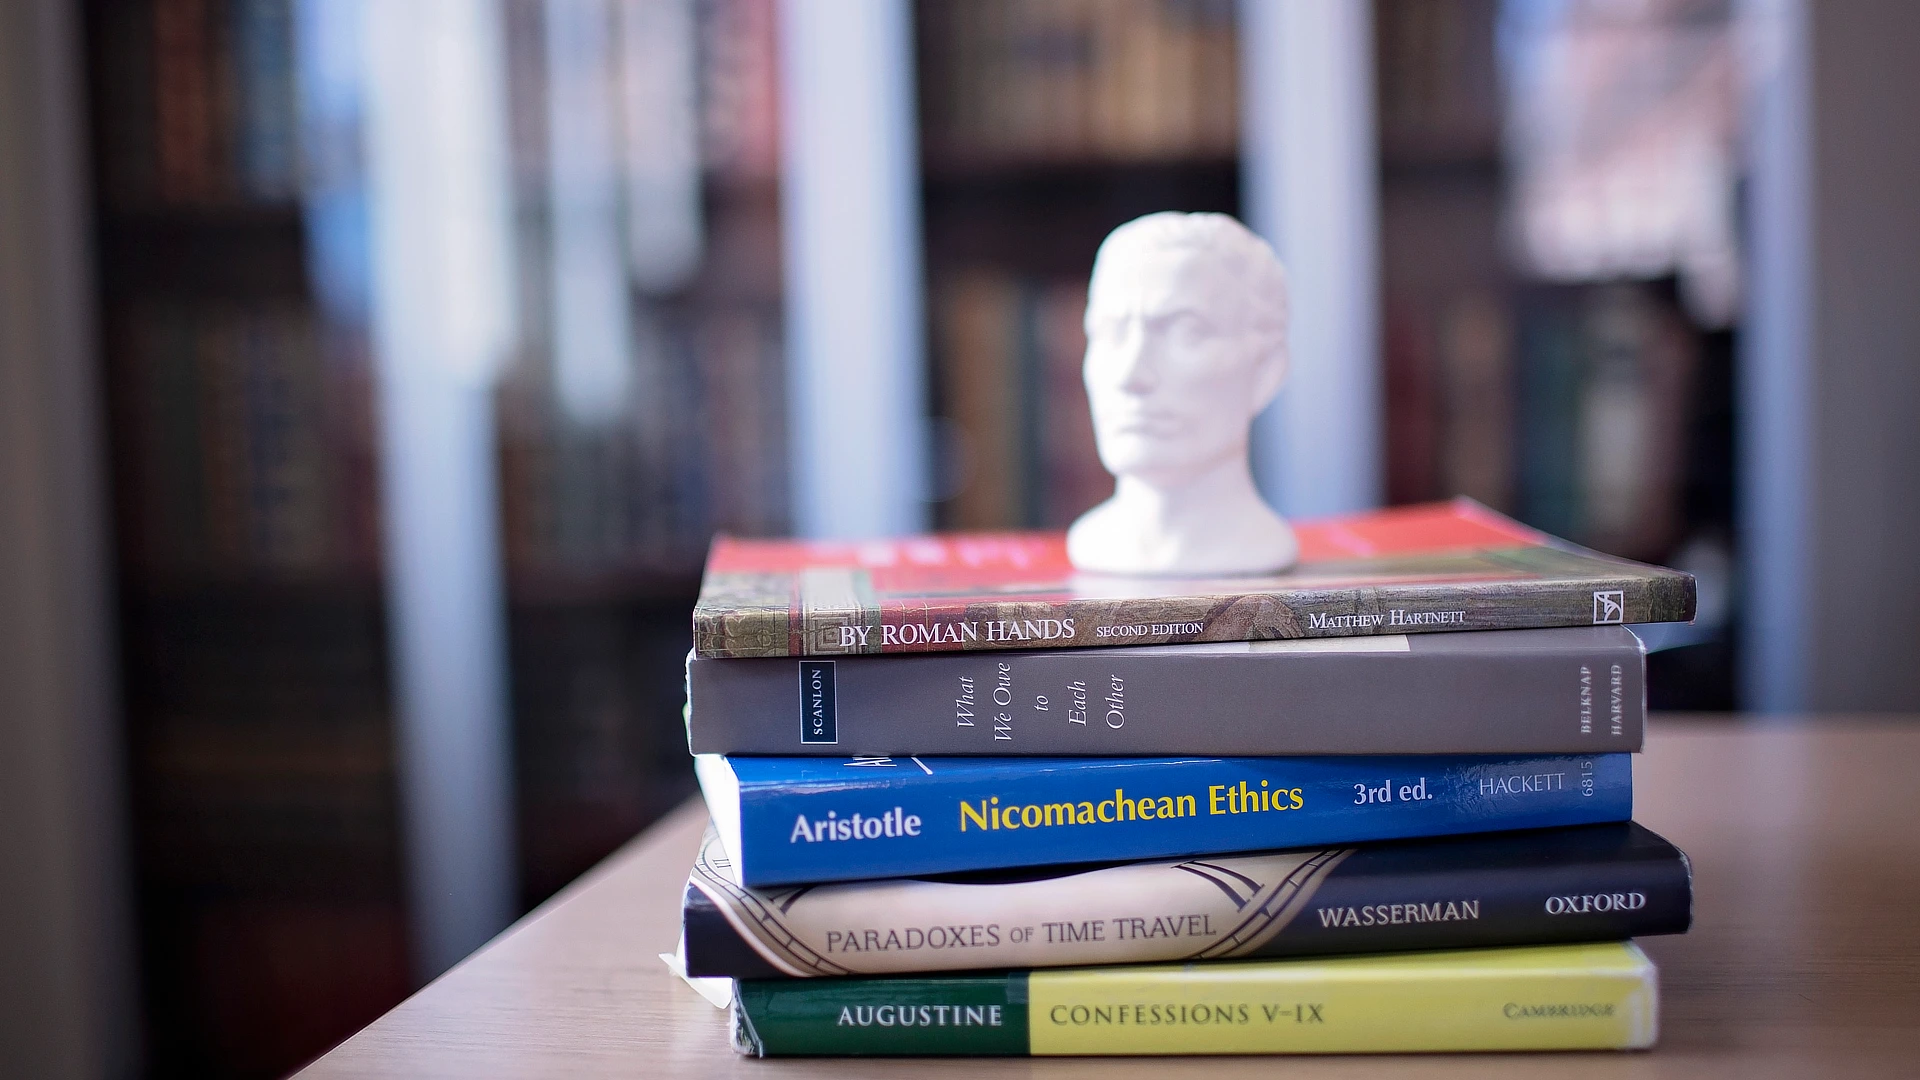 Statue Sitting On Top of Books